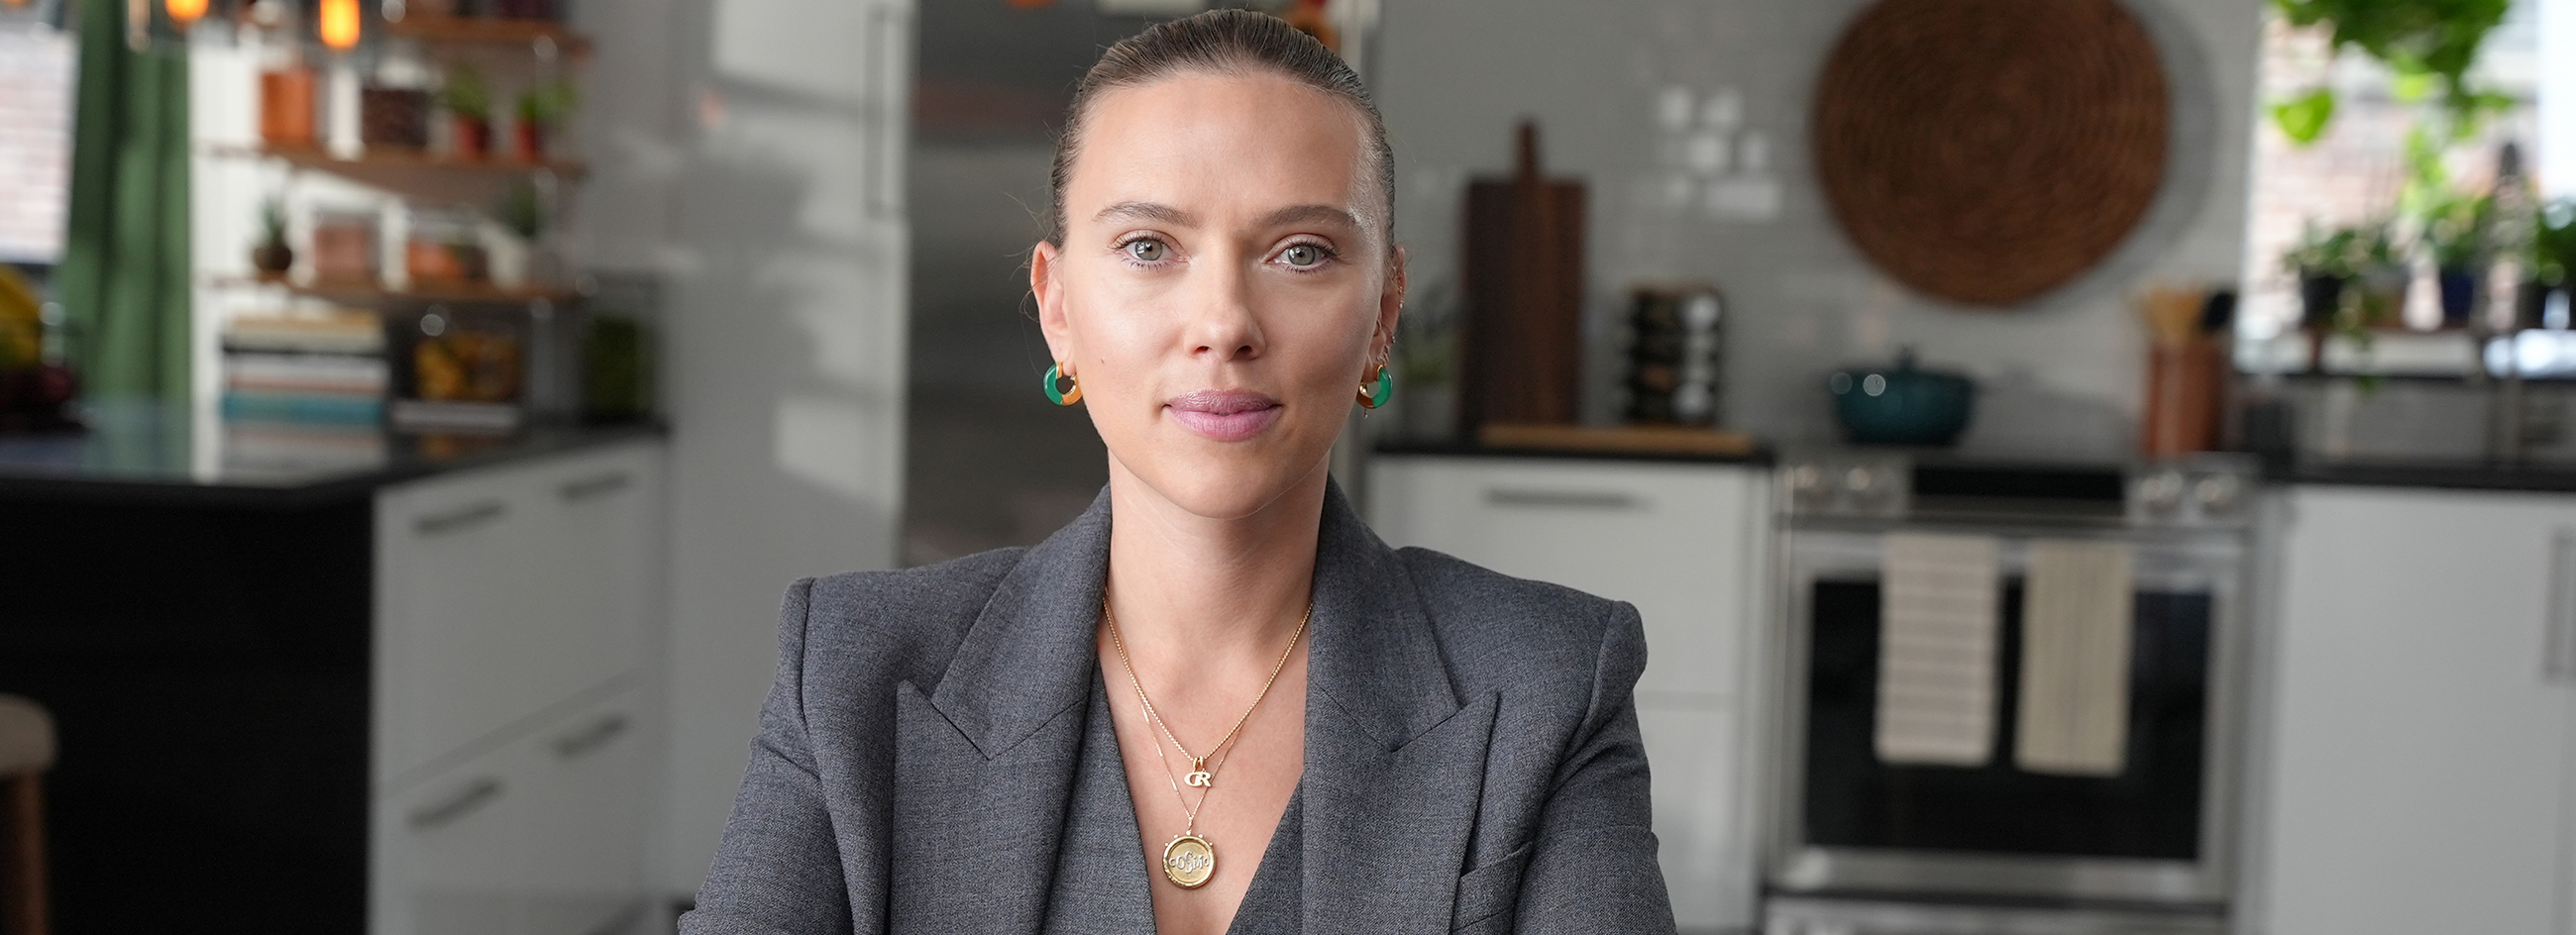 Scarlett Johansson sits at a table for the Feeding America PSA